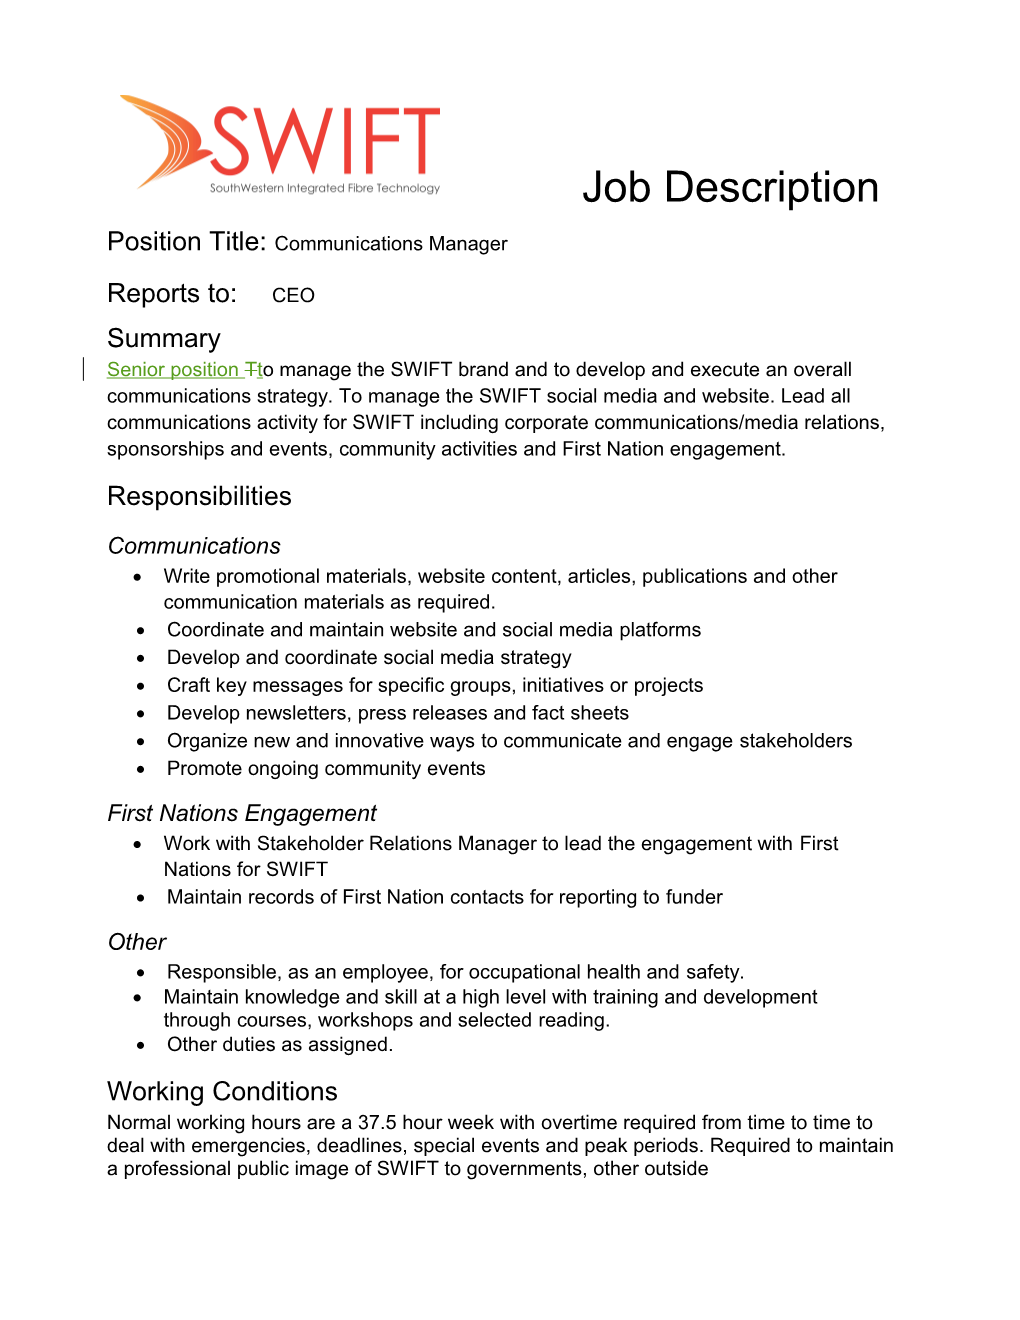 Position Title: Communications Manager